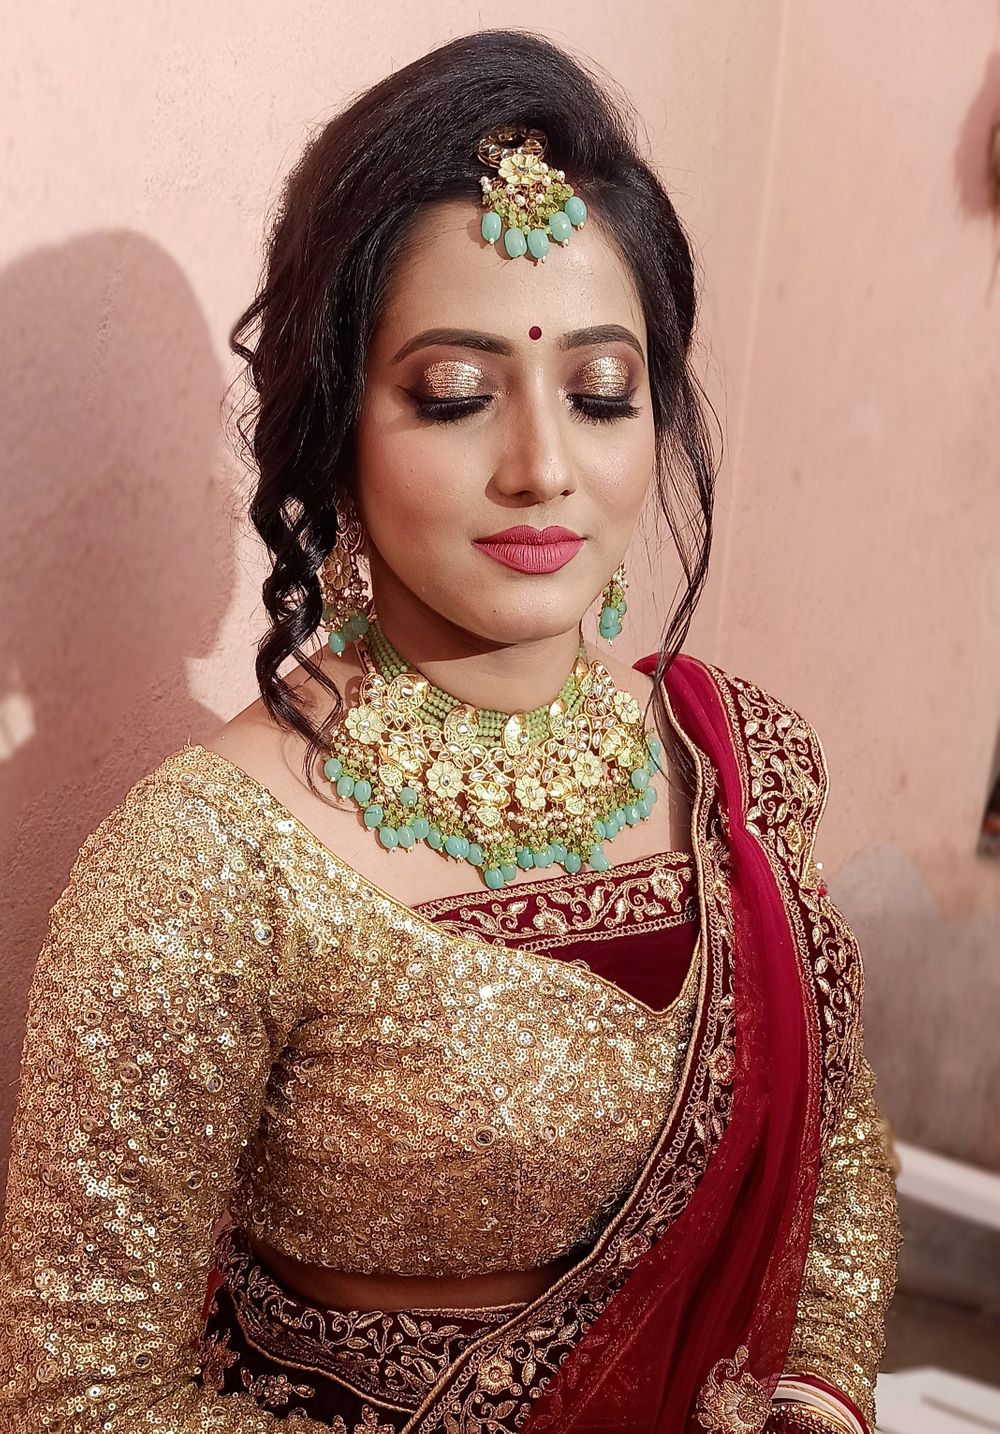 Photo From Reception bridal Makeover-64 - By Rupa's Makeup Mirror